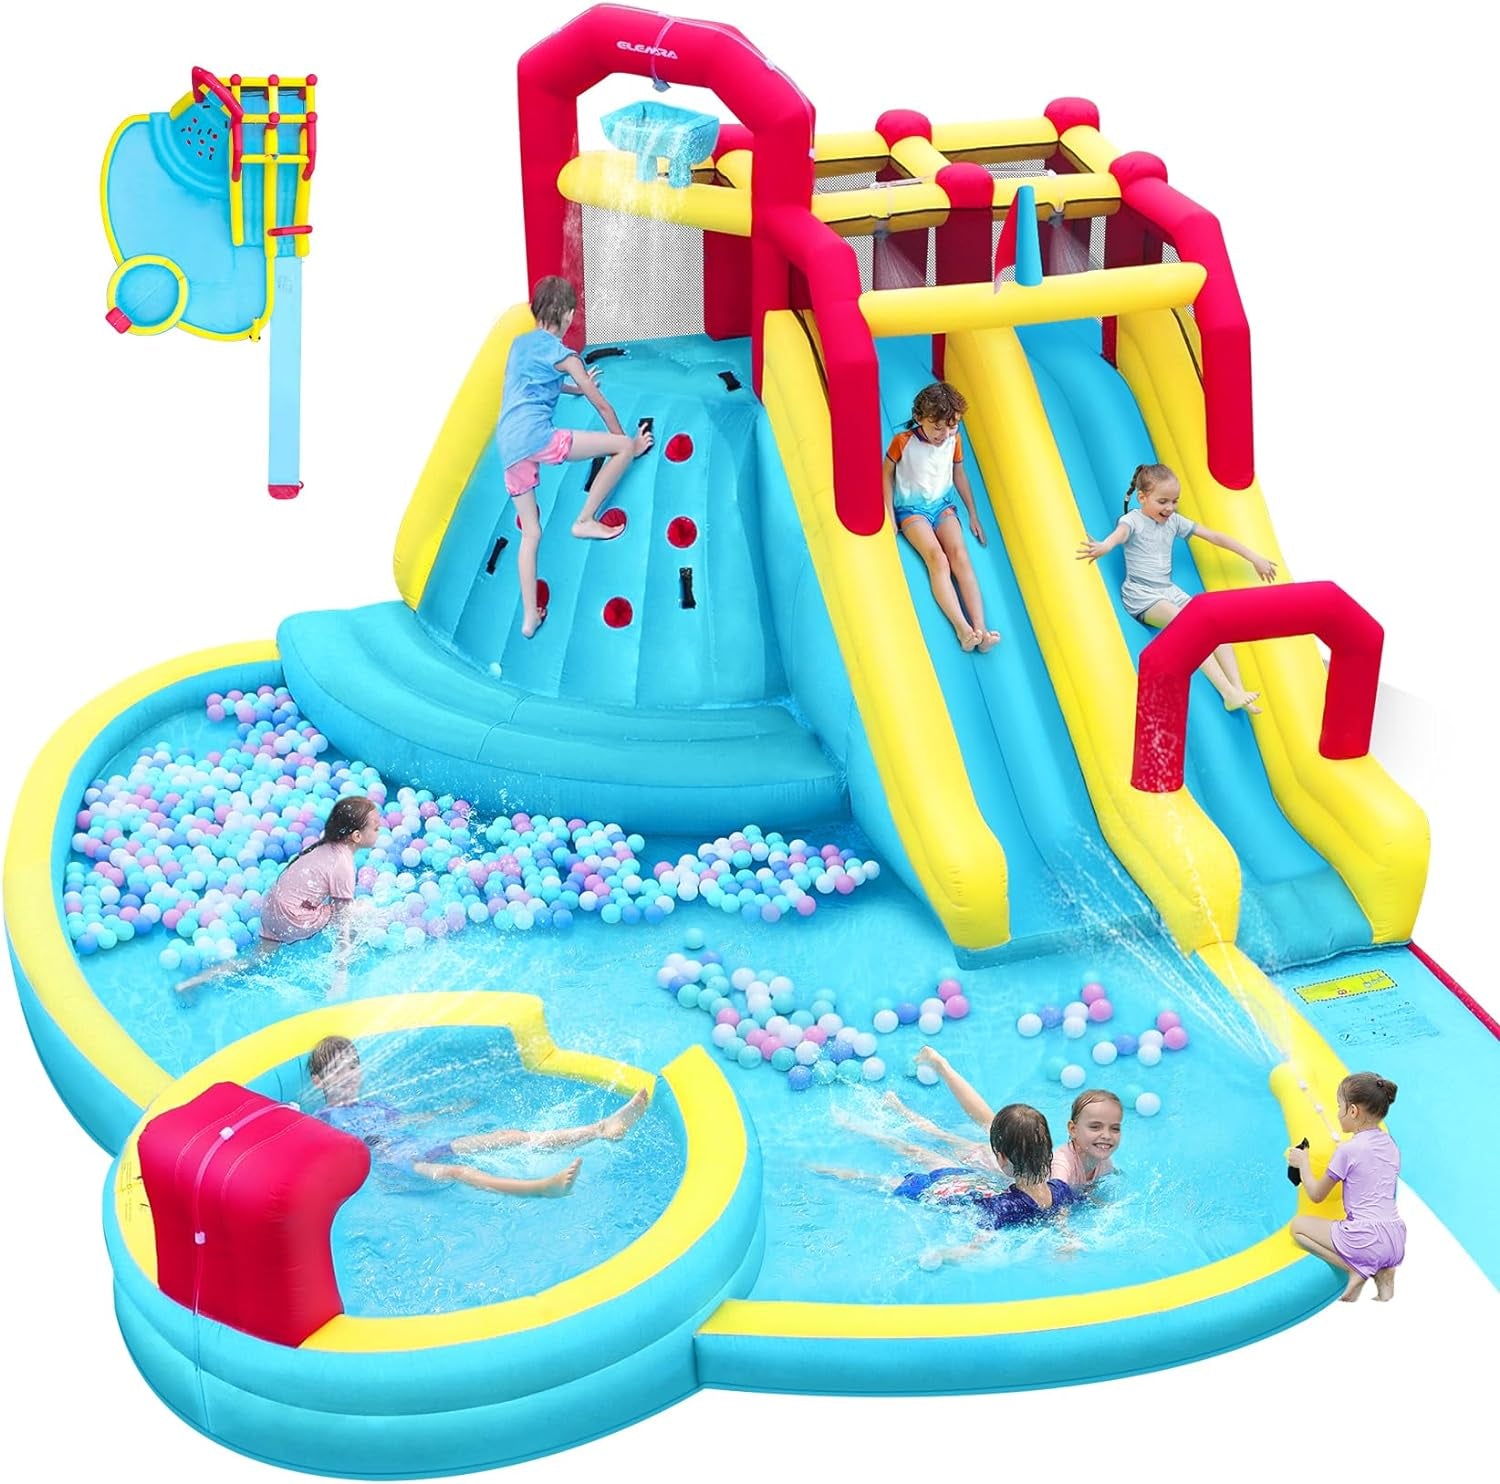 XL Inflatable Water Slides for Kids Backyard,Giant Water Park with Long Slip Splash and Slide,Double Slides for Kids and Adults with 750W Blower,Climbing Wall,Deep Pool,Water Canon for Outdoor